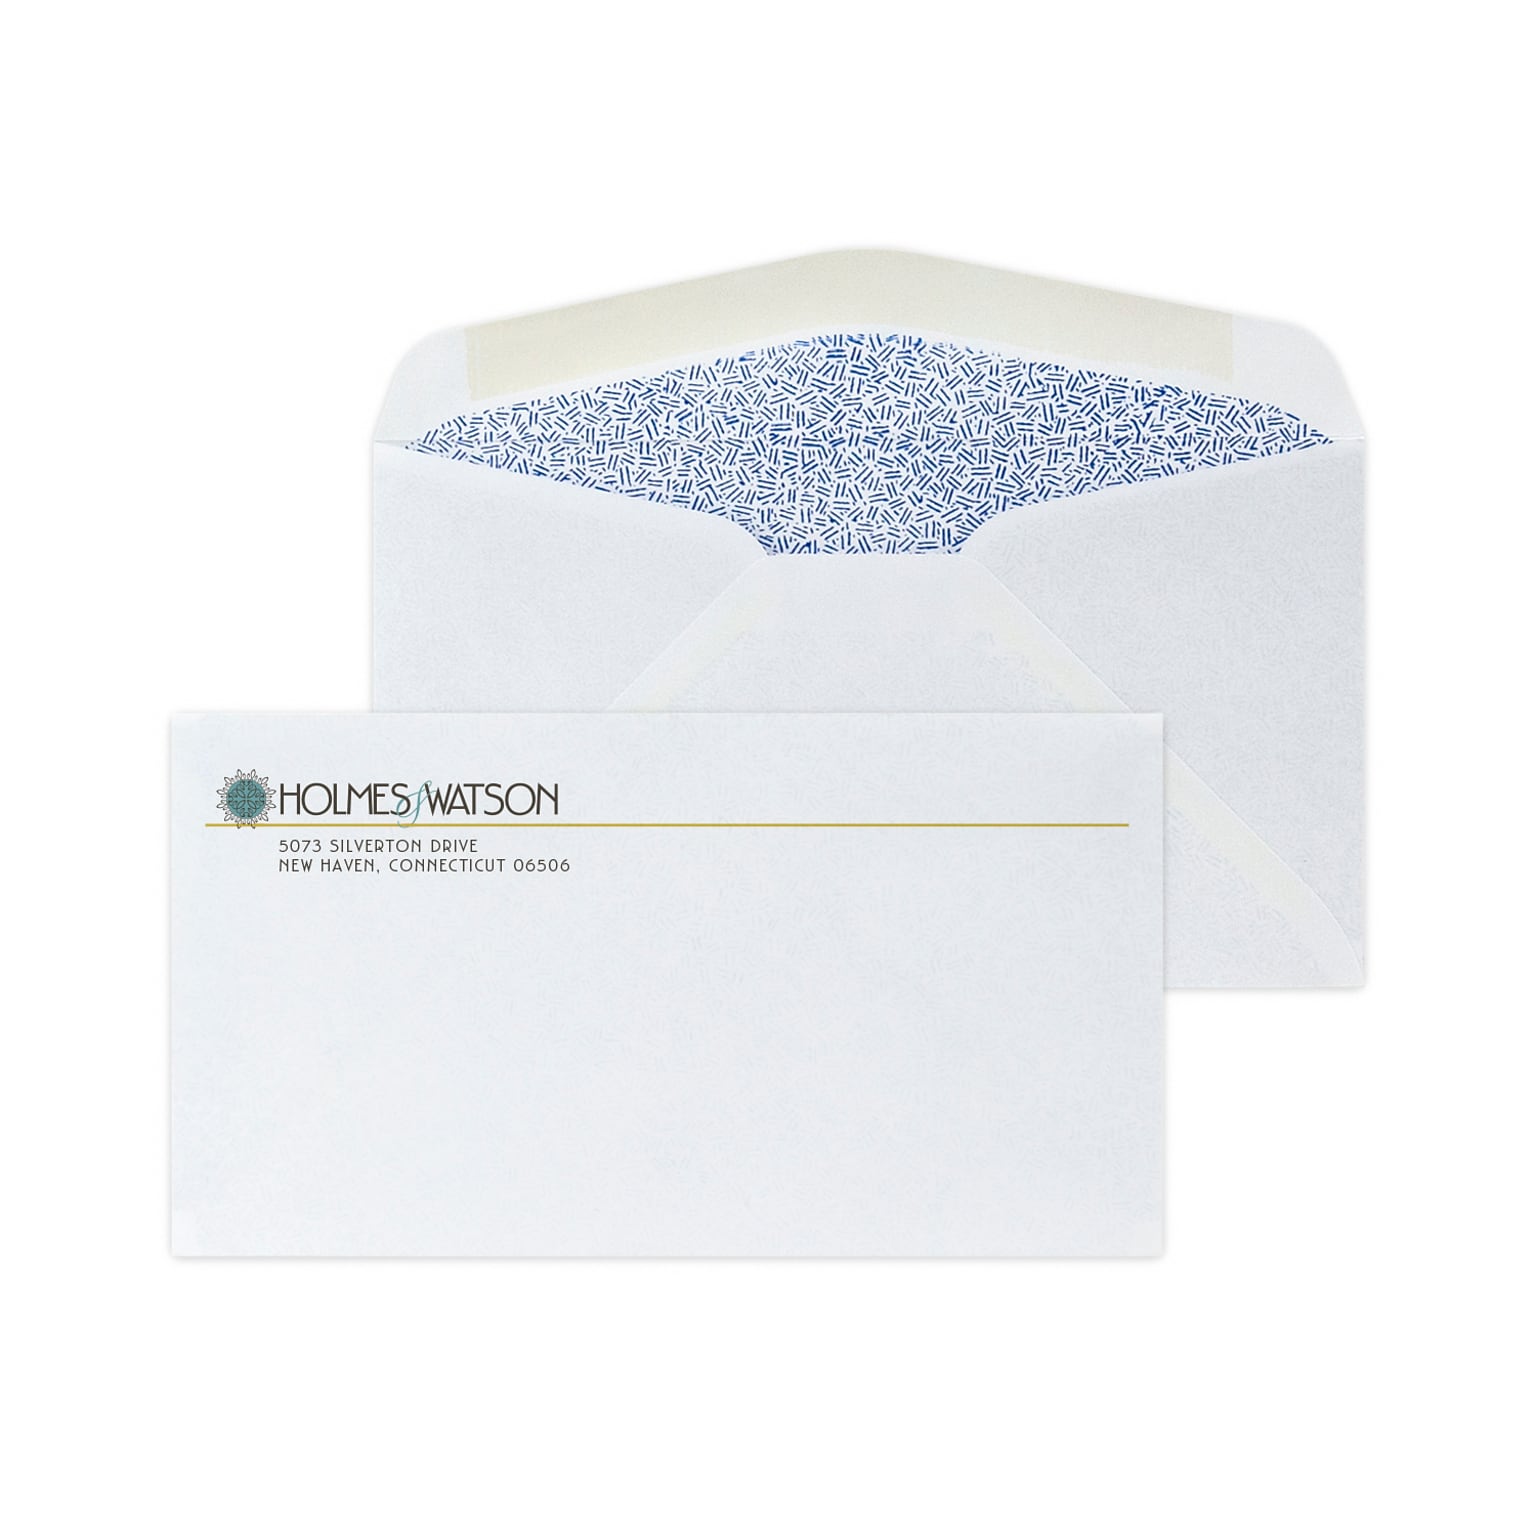 Custom Full Color #6-3/4 Diagonal Seam Standard Envelopes with Security Tint, 3 5/8 x 6 1/2, 24# White Wove, 250 / Pack